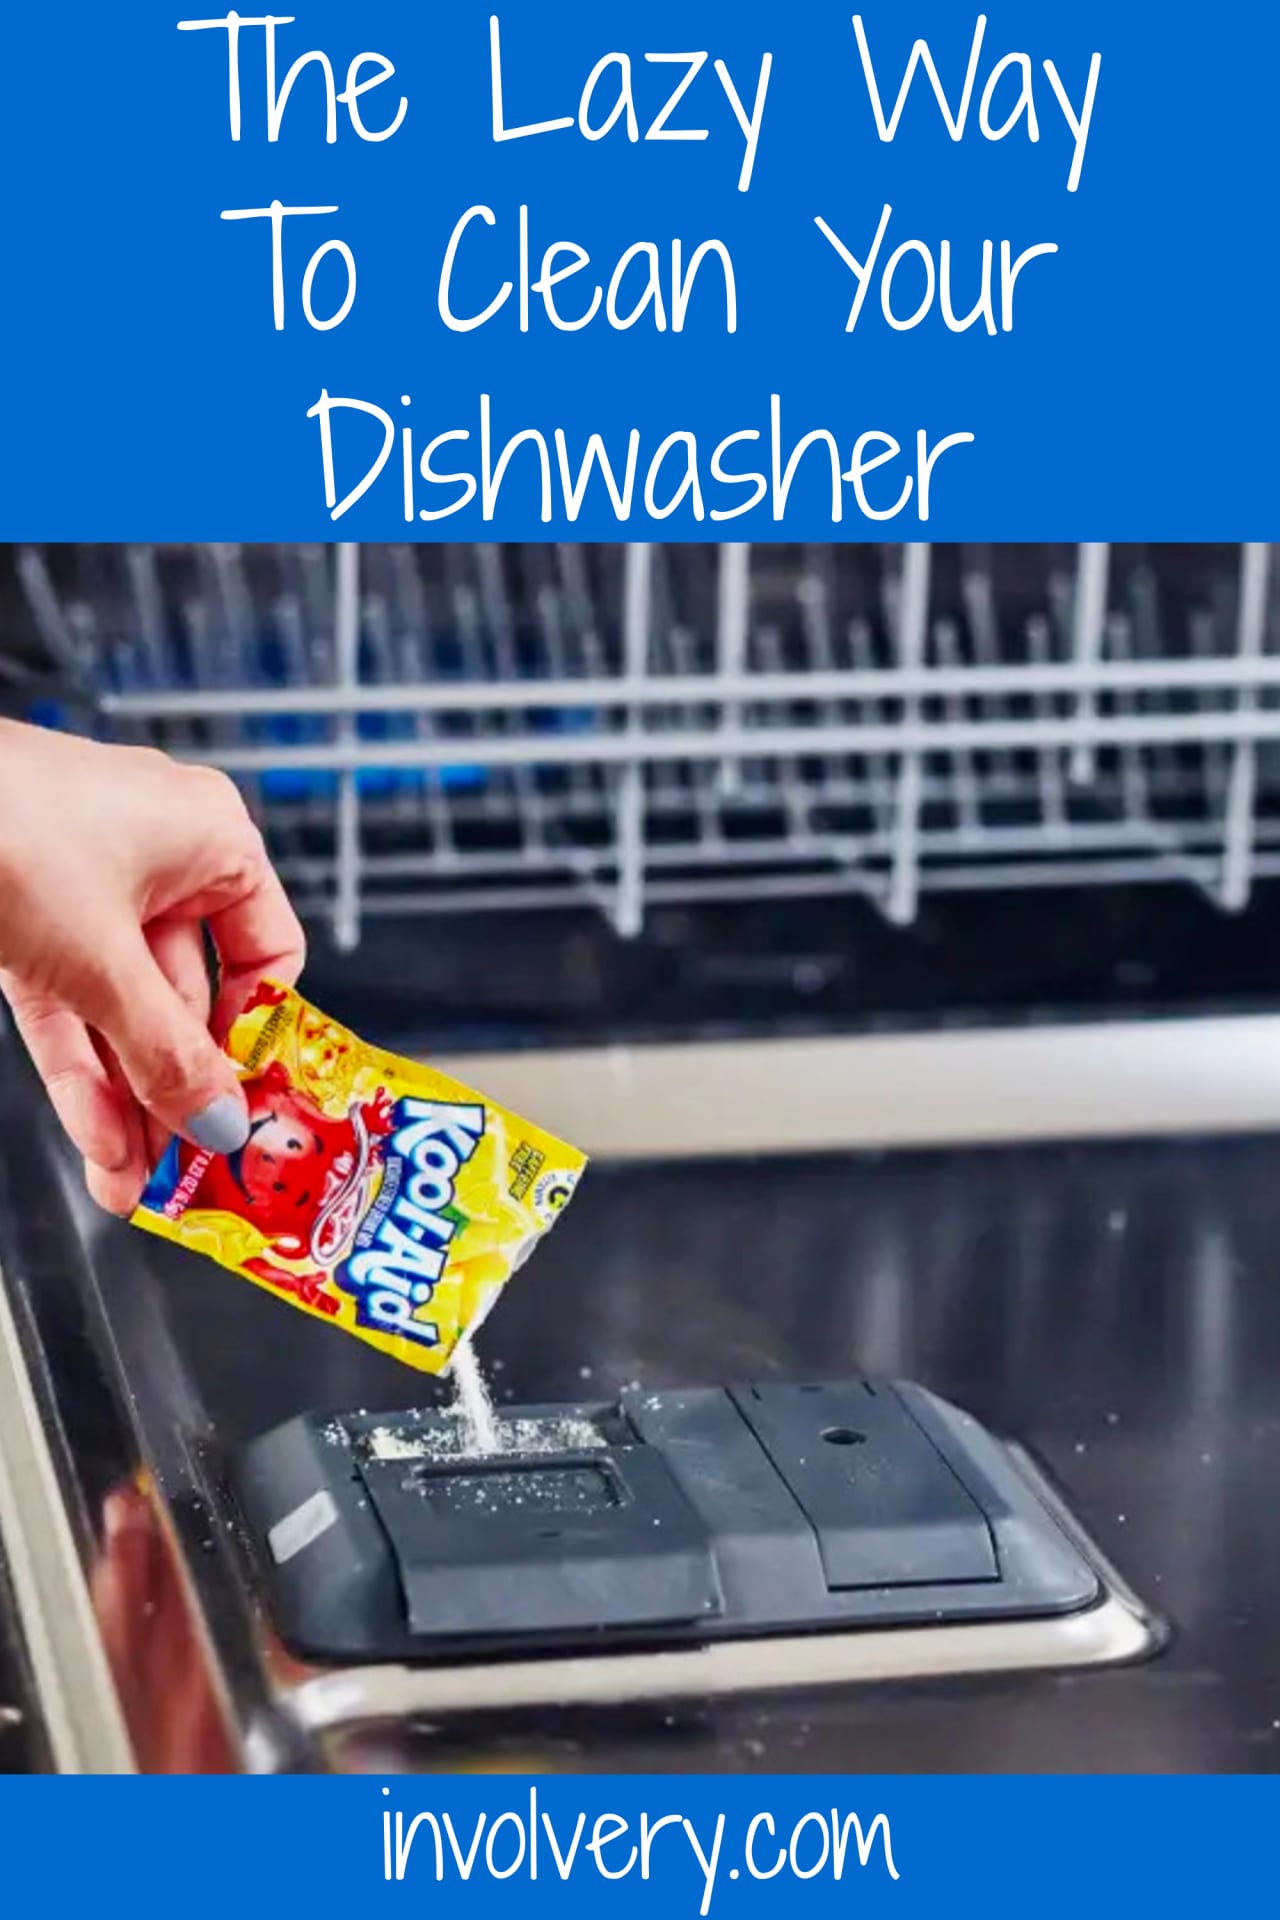 clean dishwasher with koolaid - kitchen cleaning hacks - Lazy Cleaning Hacks - the simple way to clean your dishwasher (yes, that's KoolAid!) - Lazy Girls LOVE this kitchen cleaning hack!